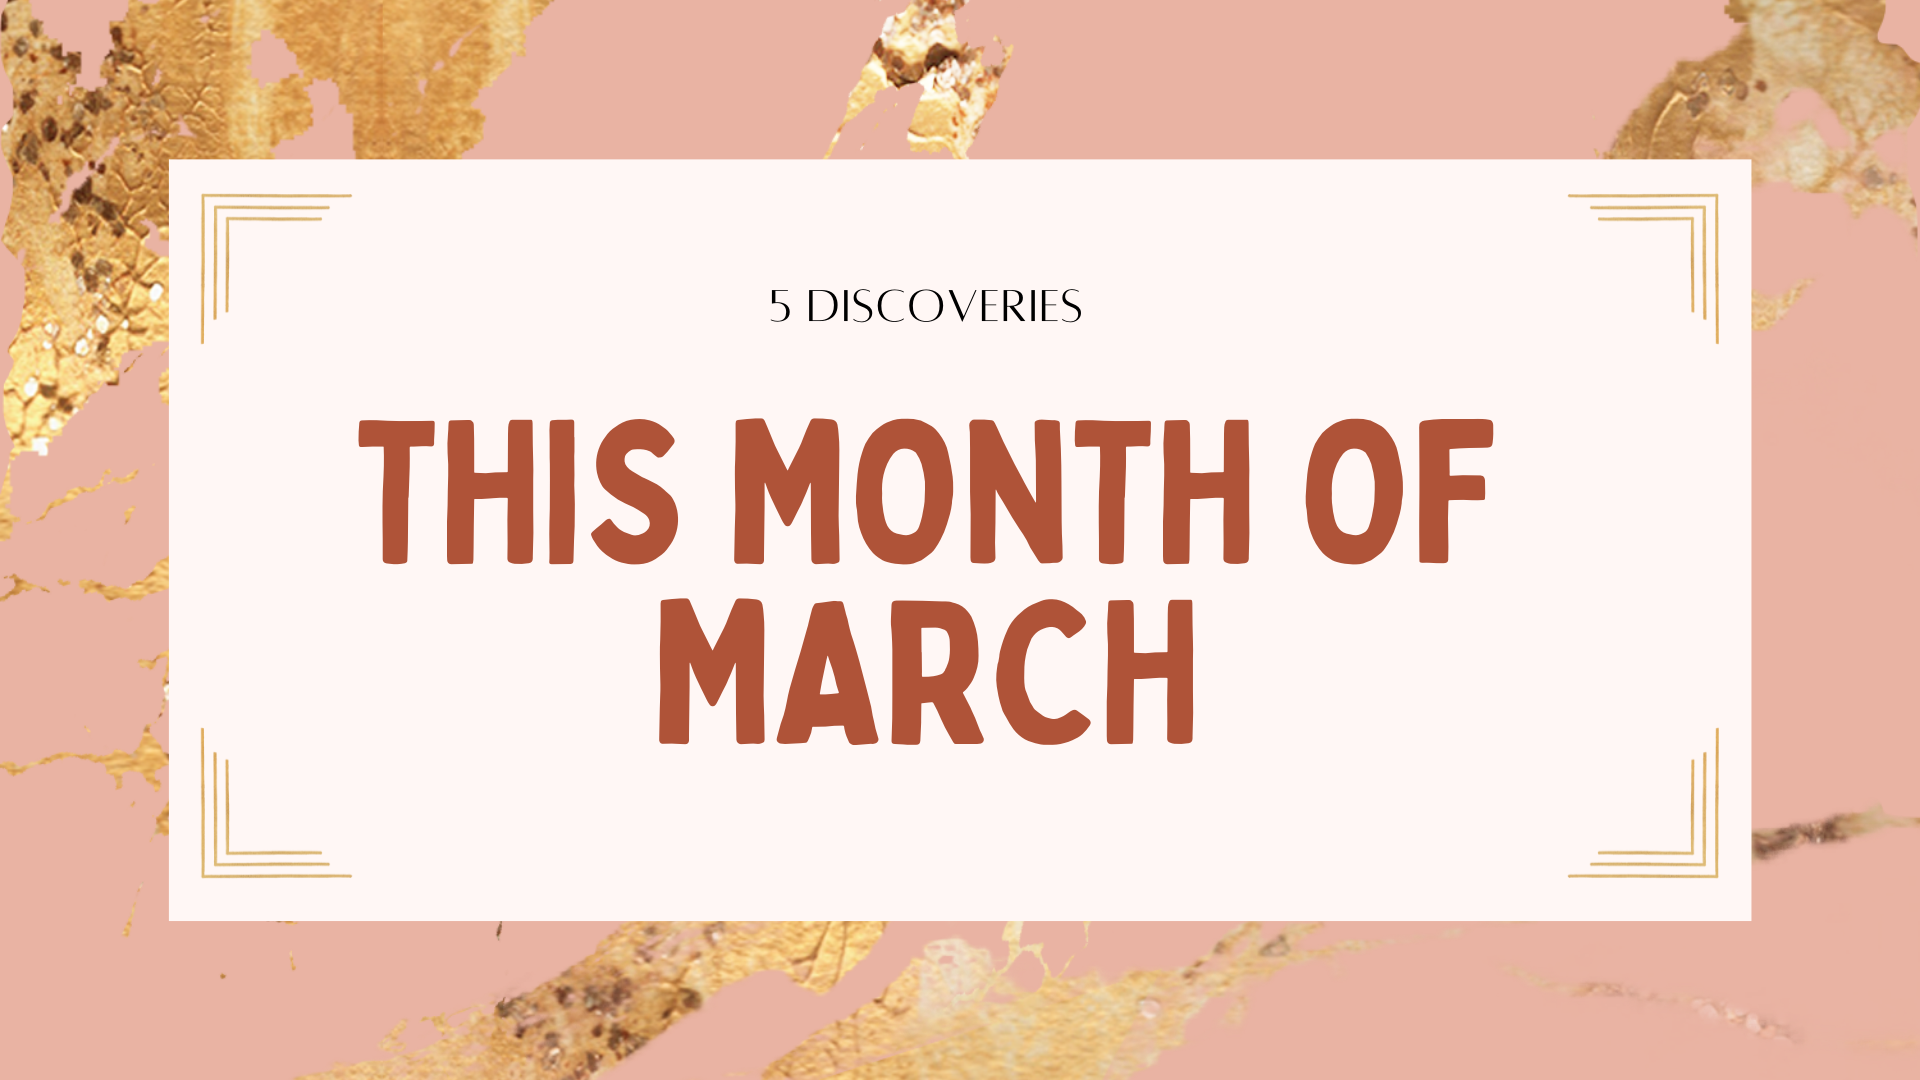 5 Discoveries This Month of March